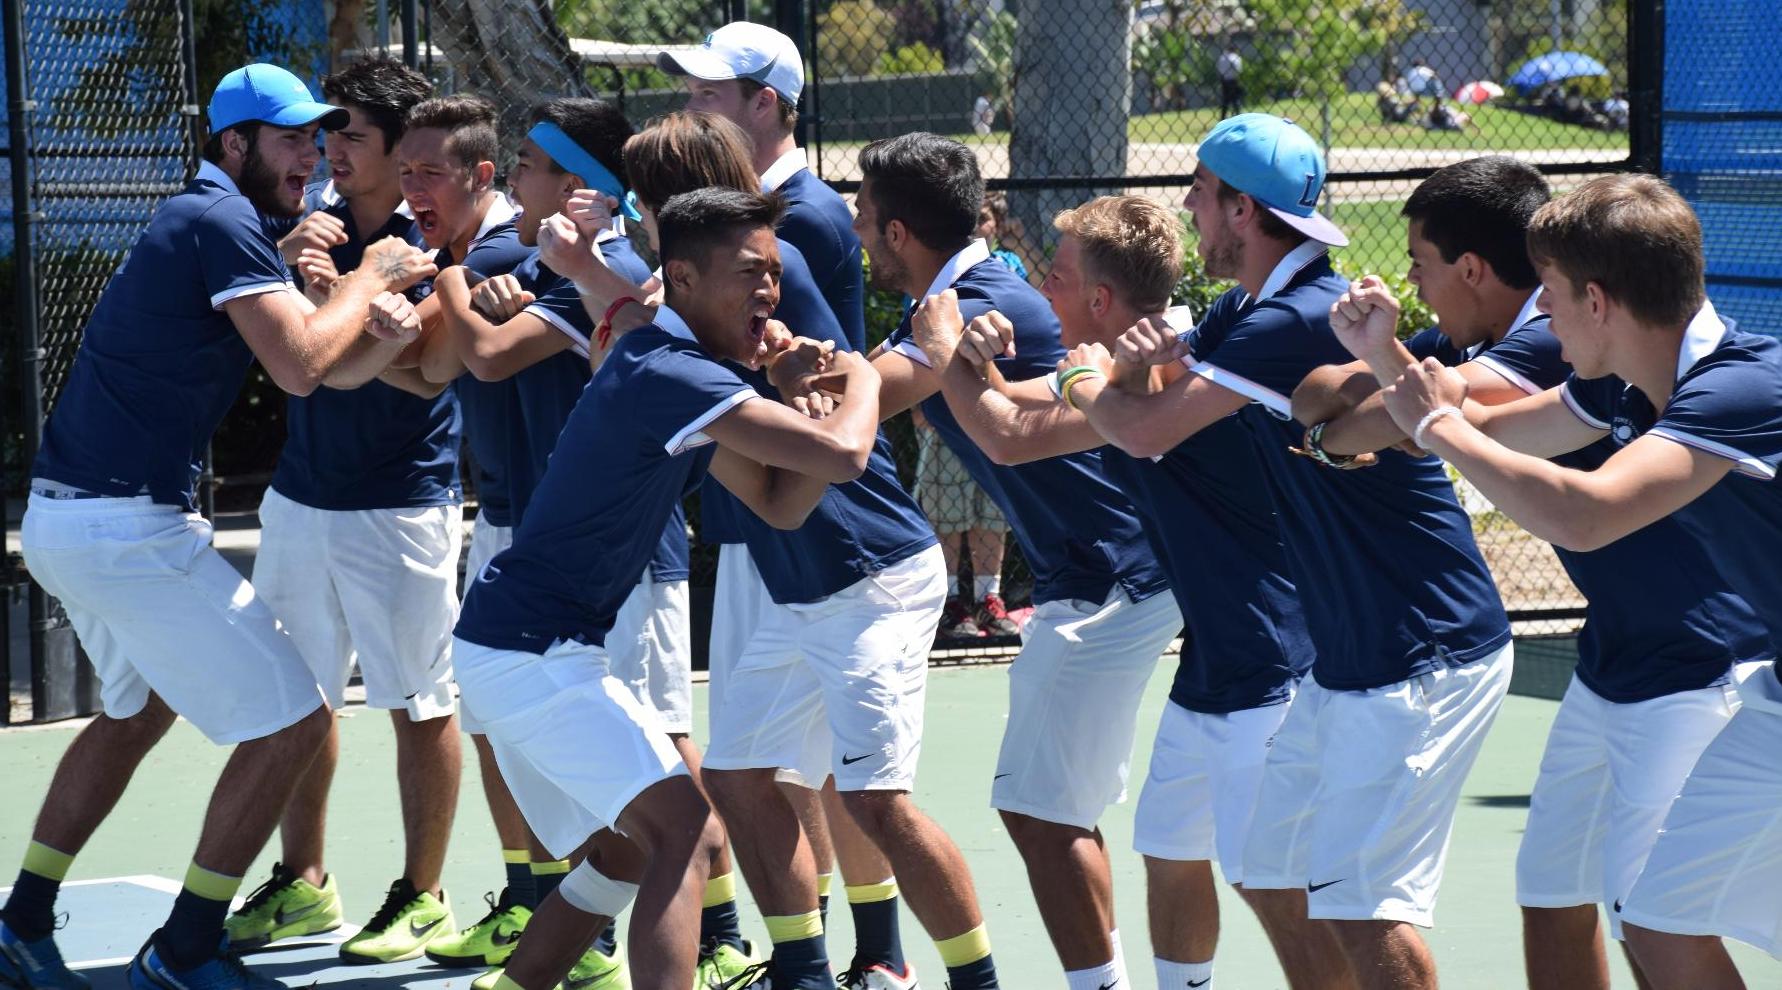 Men's tennis team headed to third state final in a row